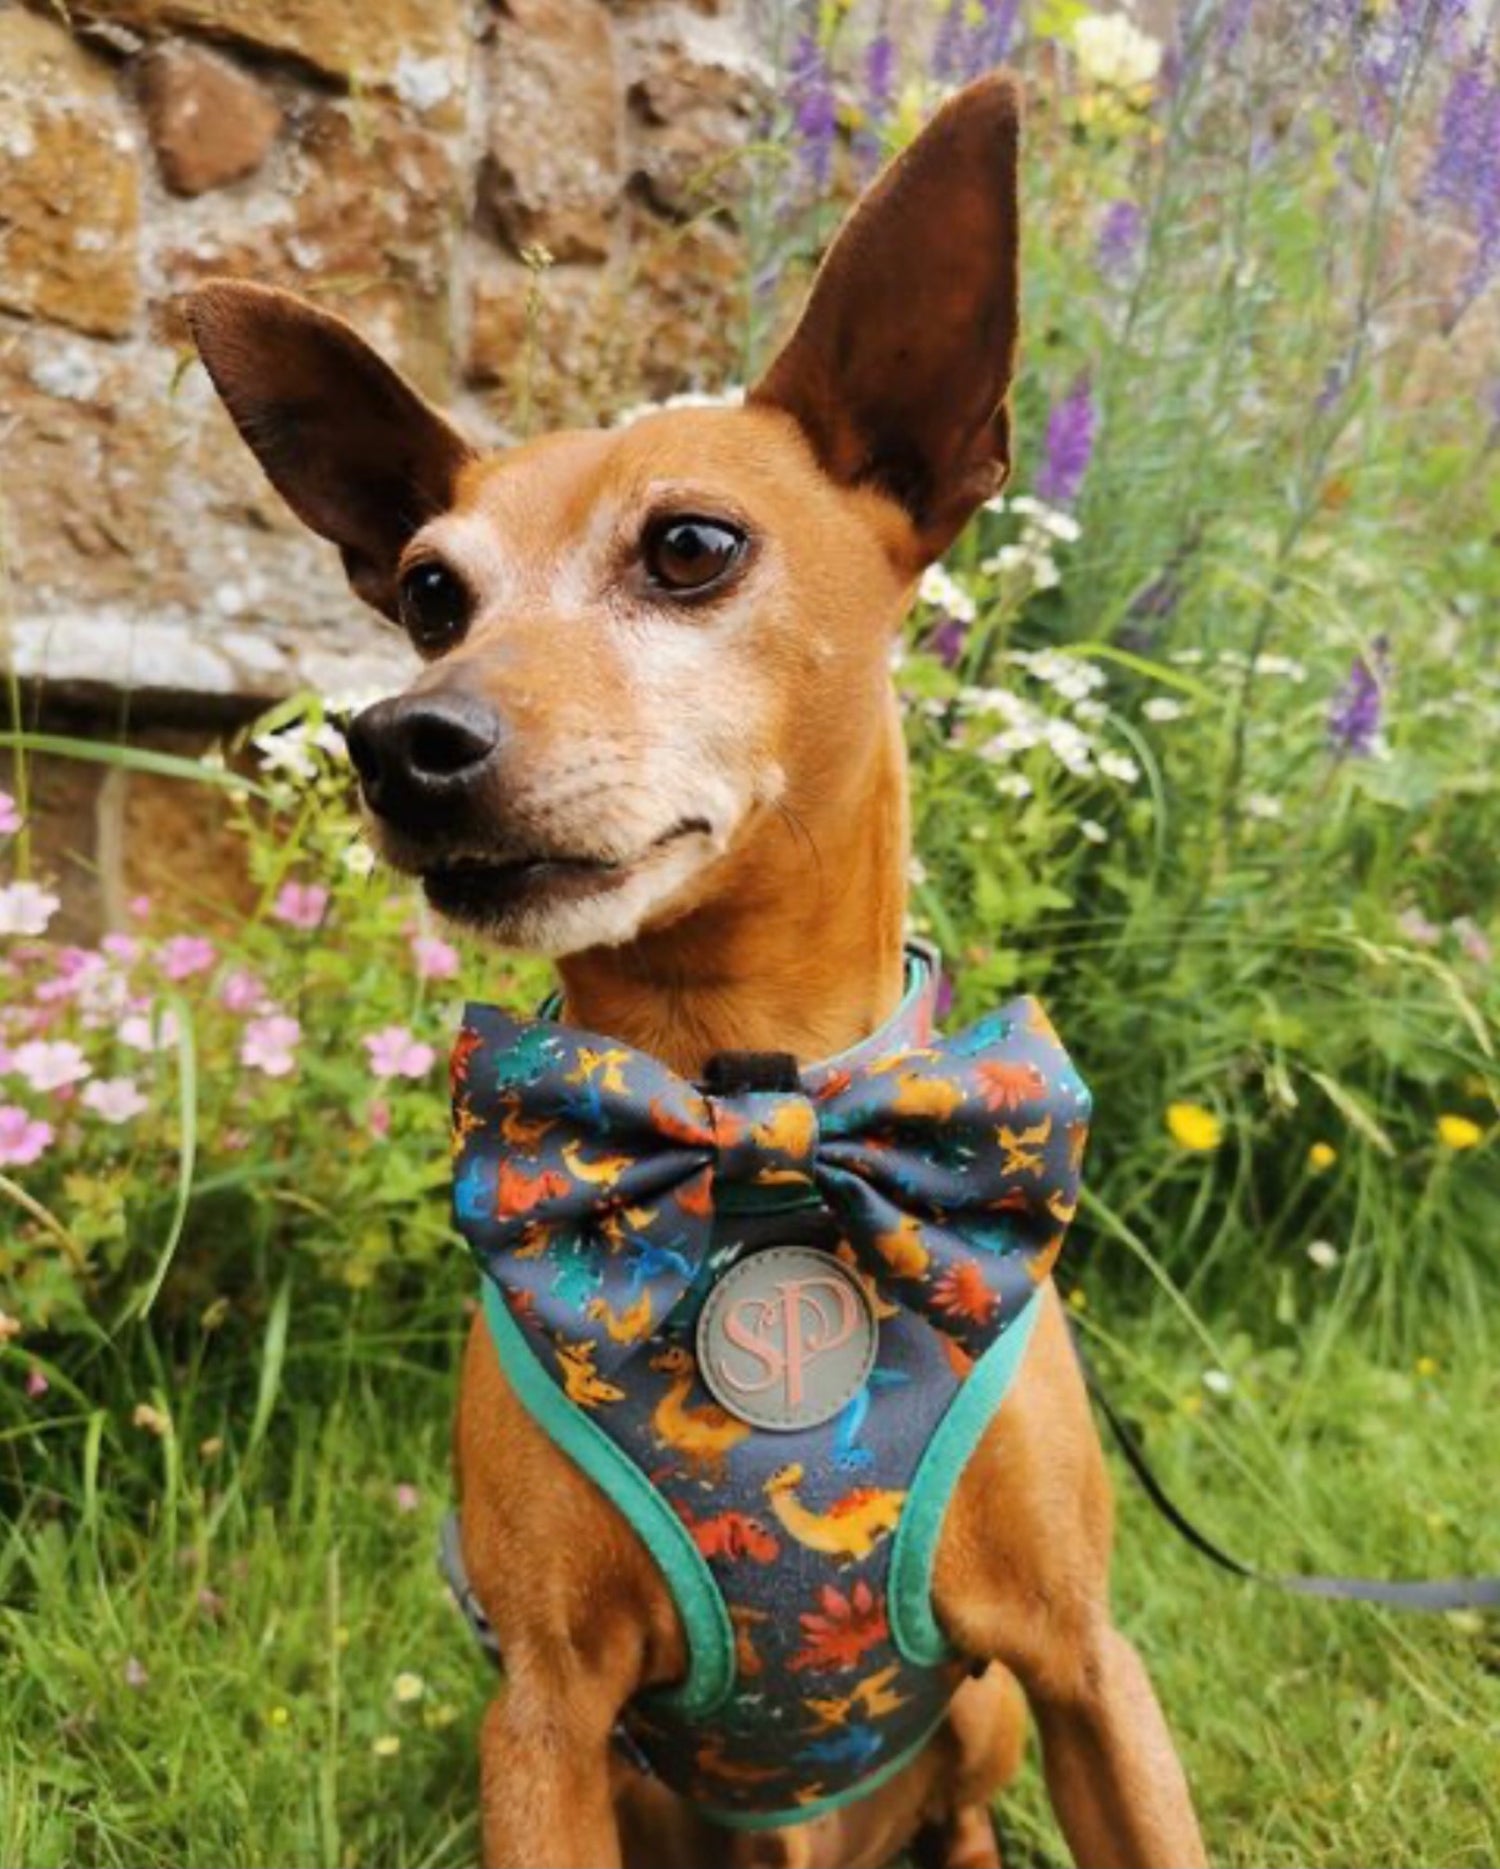 Miniature Pinscher Monty in Rex dog harness and bow tie